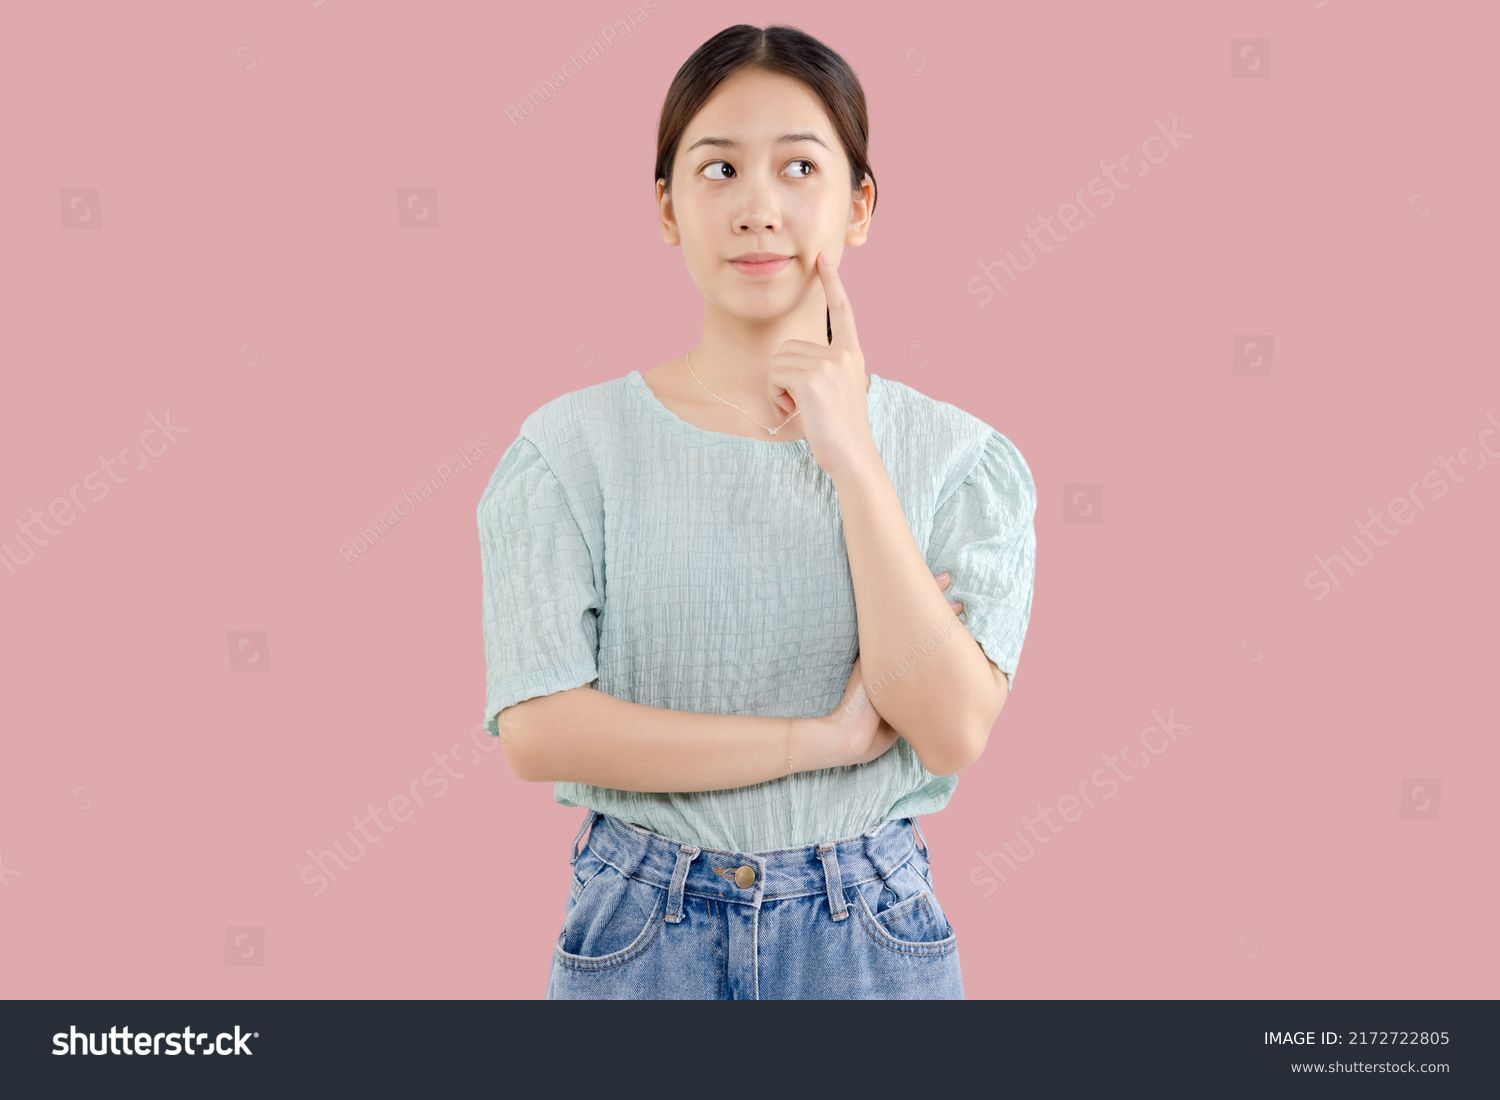 Beautiful young Asian girl thinking and looking upwards. The concept of content thinks about future isolated on pink background. #2172722805